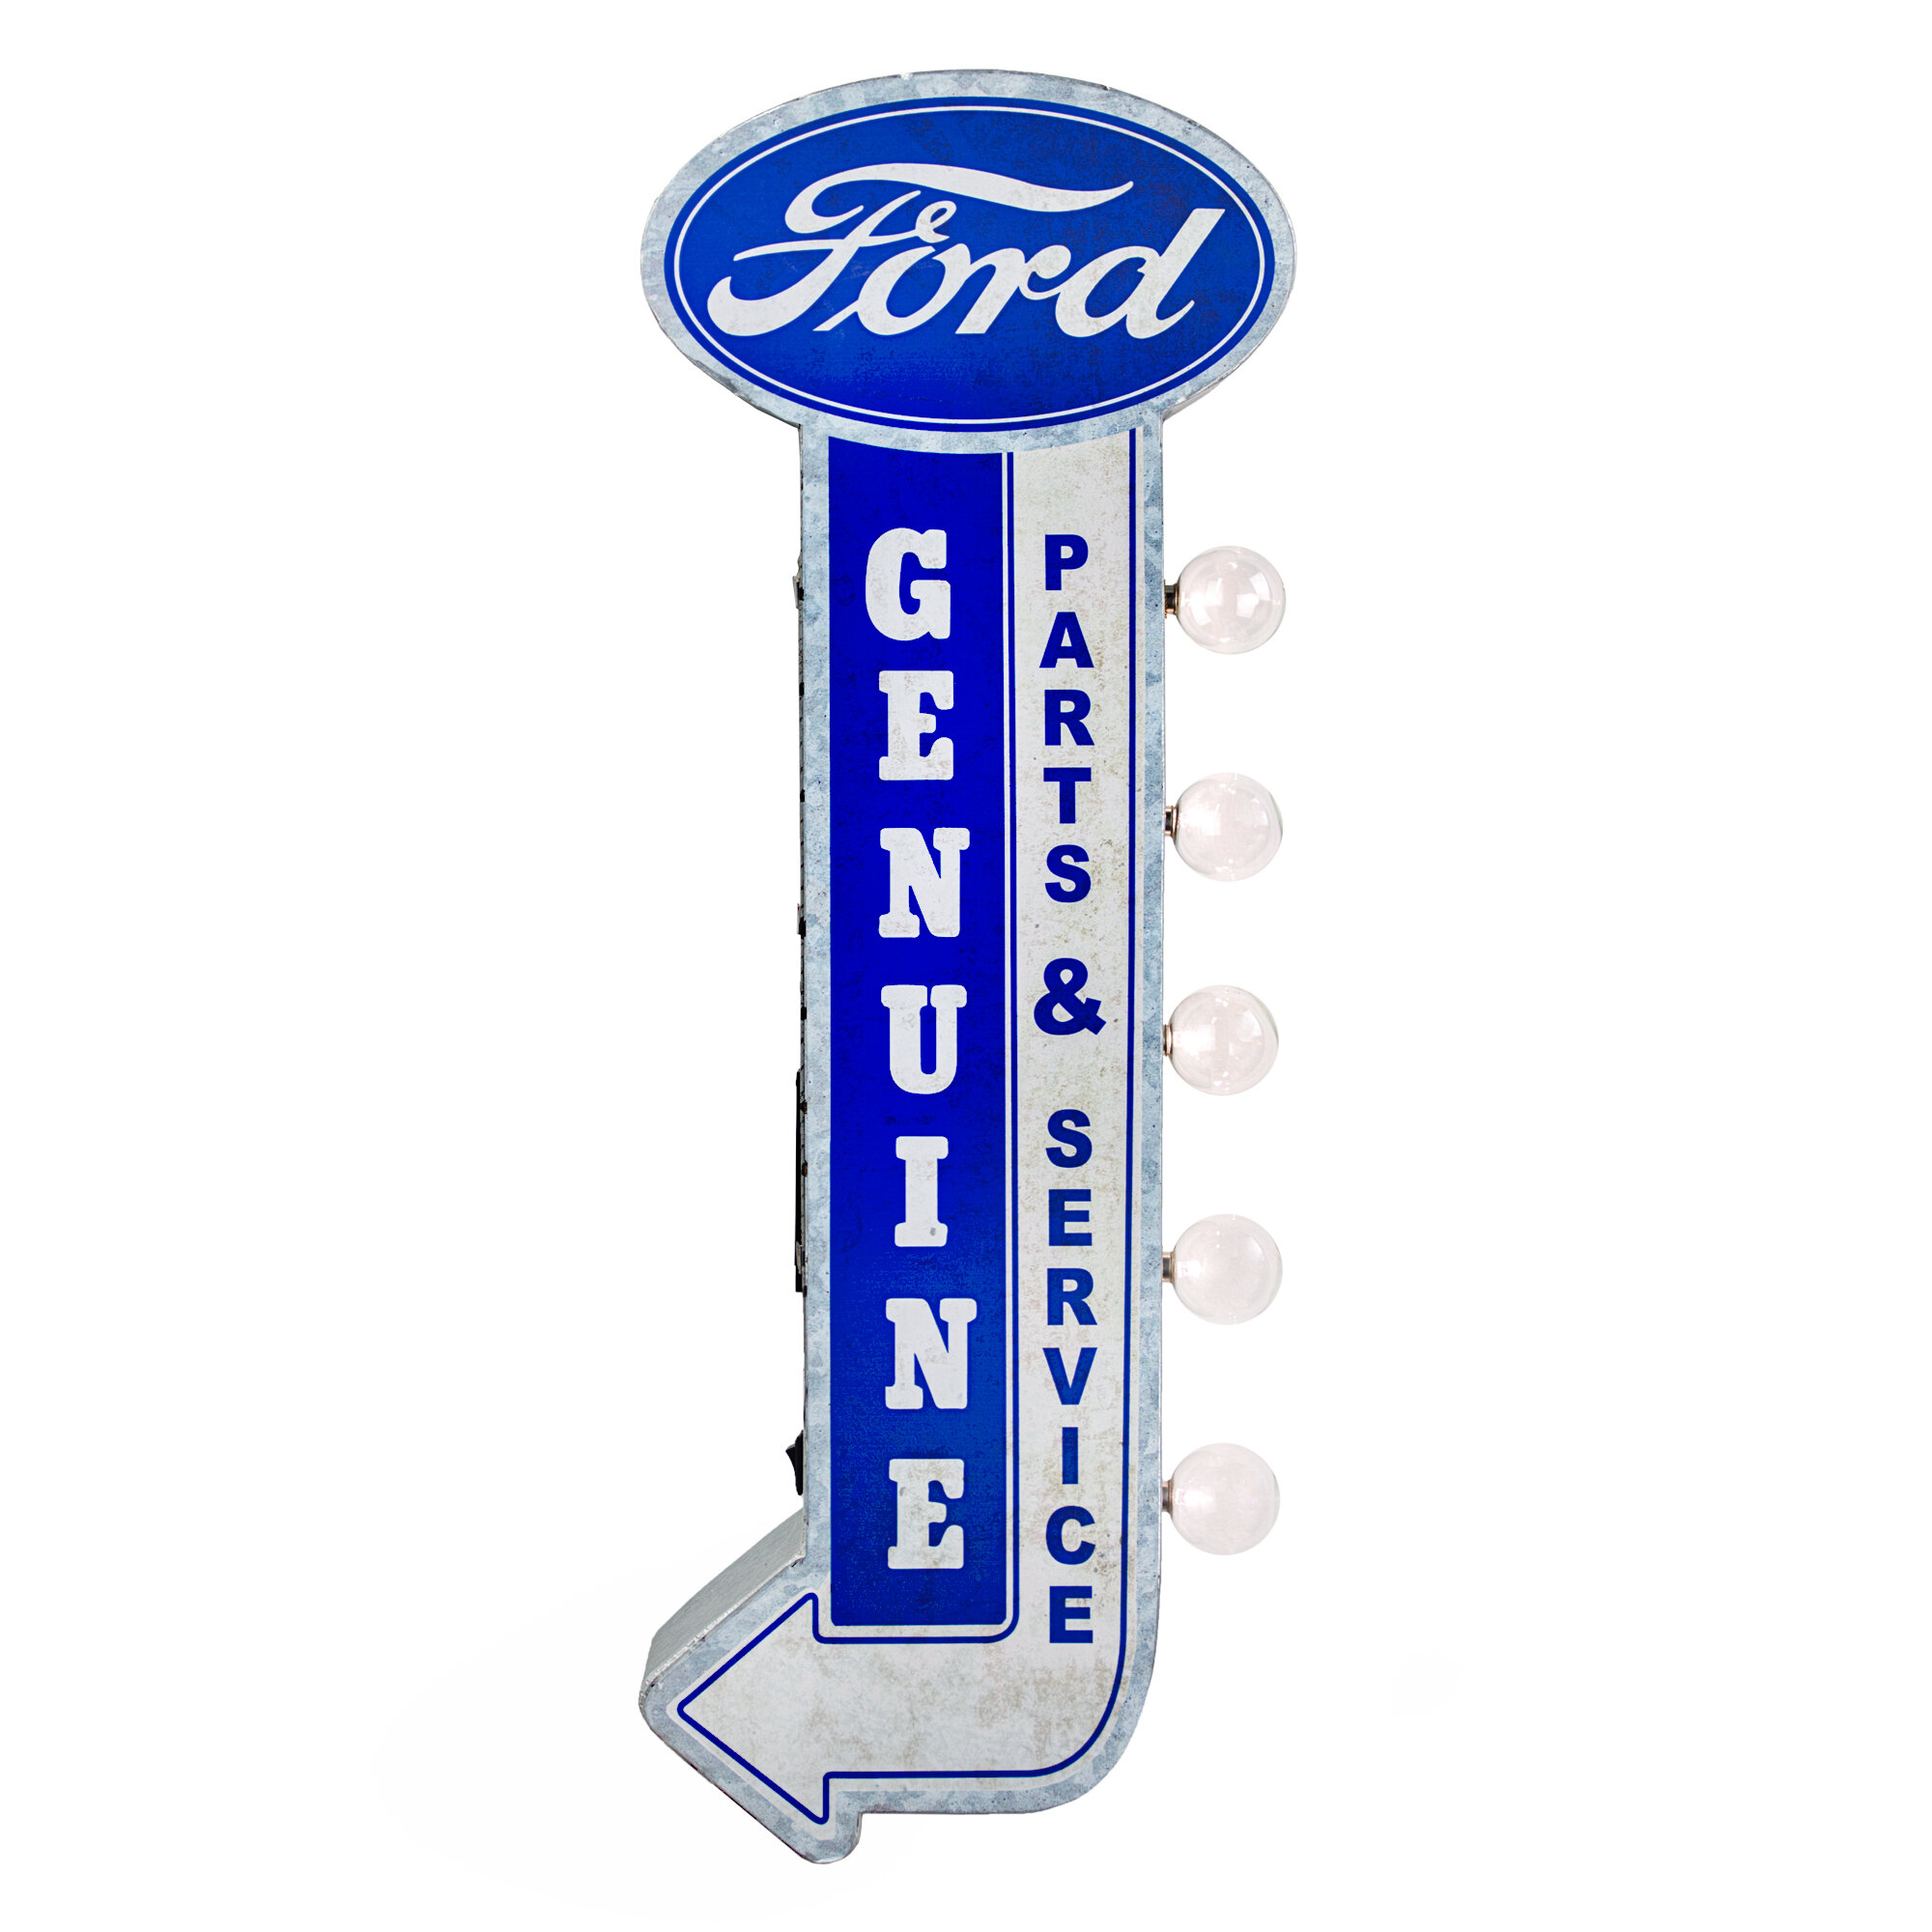 NEW! Vintage Style Ford Logo Metal Wall Thermometer Garage Man Cave Decor  12